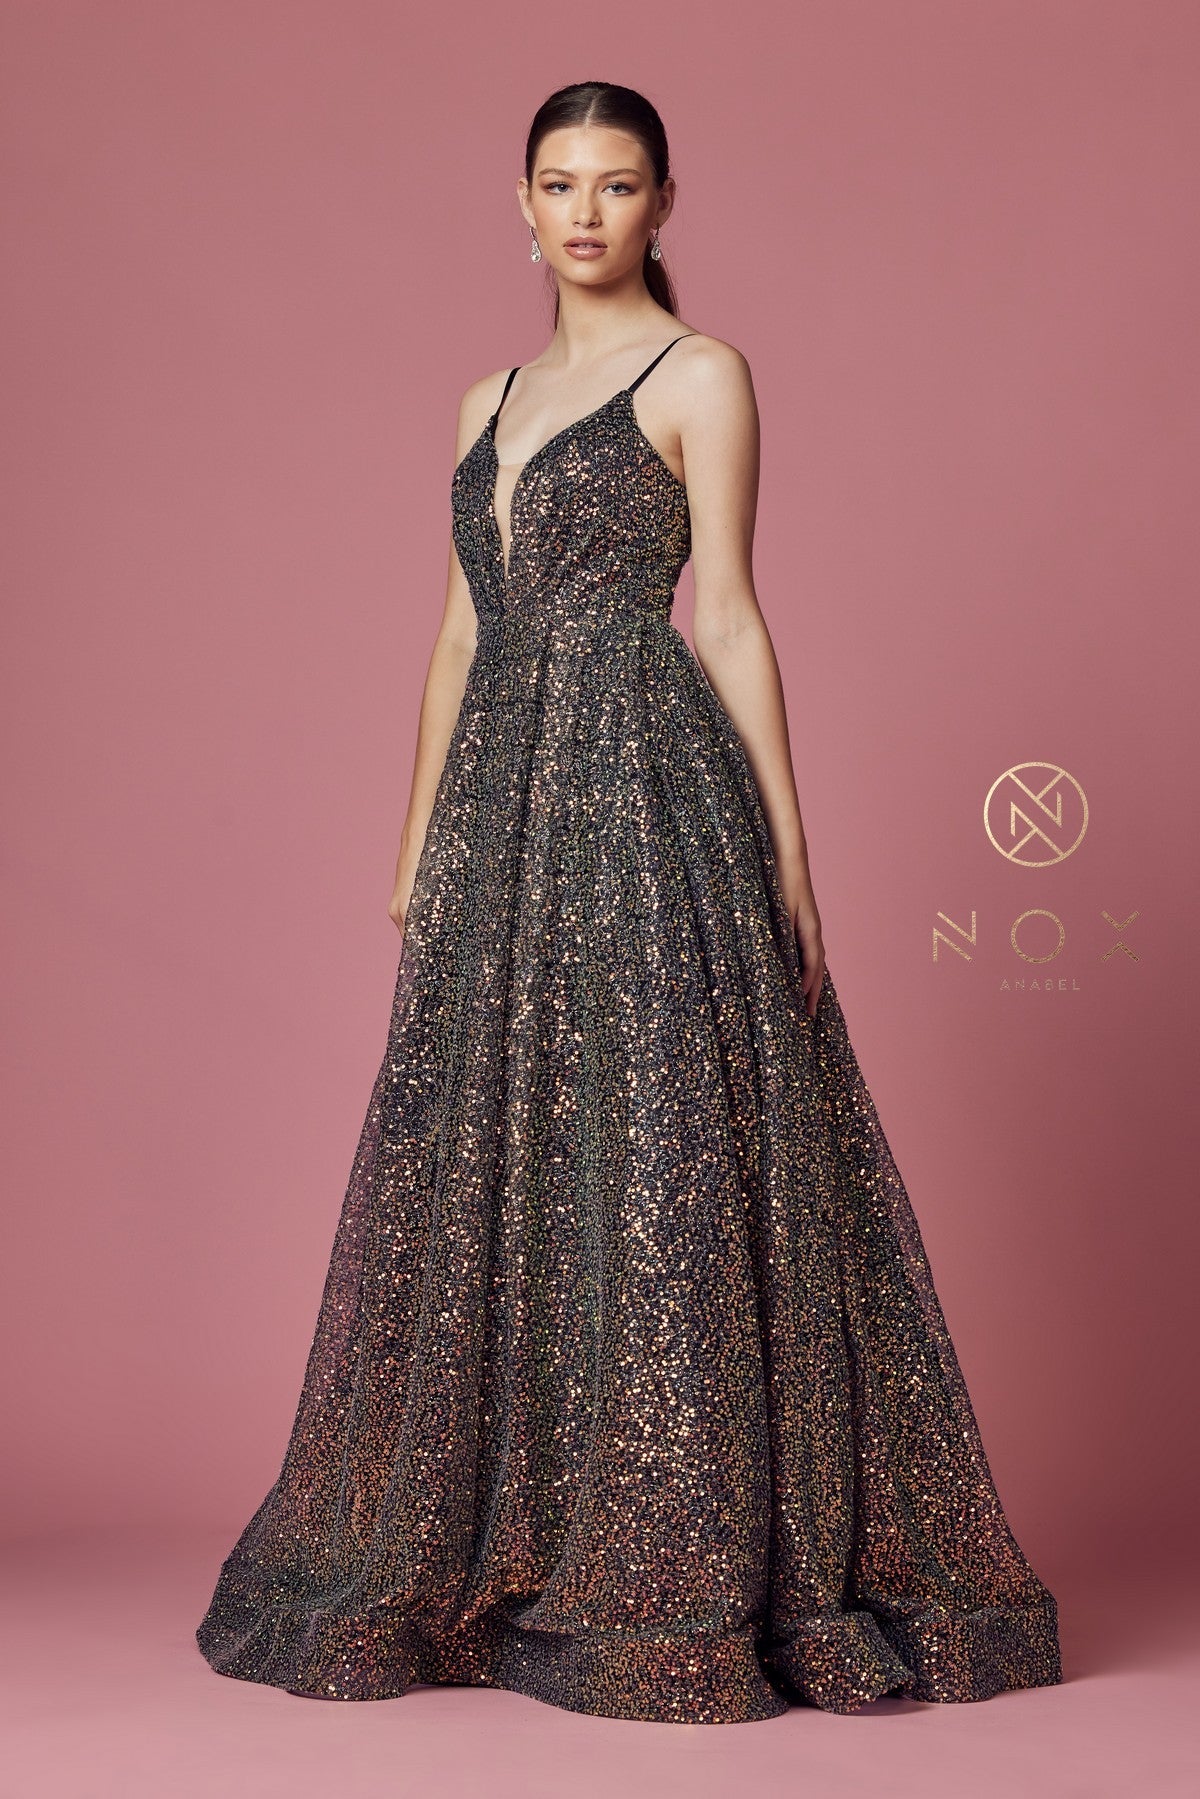 Nox Anabel R1030 Sequin A Line Formal Ballgown V Neck Prom Pageant Dress SEQUIN CHIFFON BALLGOWN WITH DEEP V NECKLINE ZIPPER ON THE BACK  Available Sizes: 2-16  Available Colors: Black/Multi